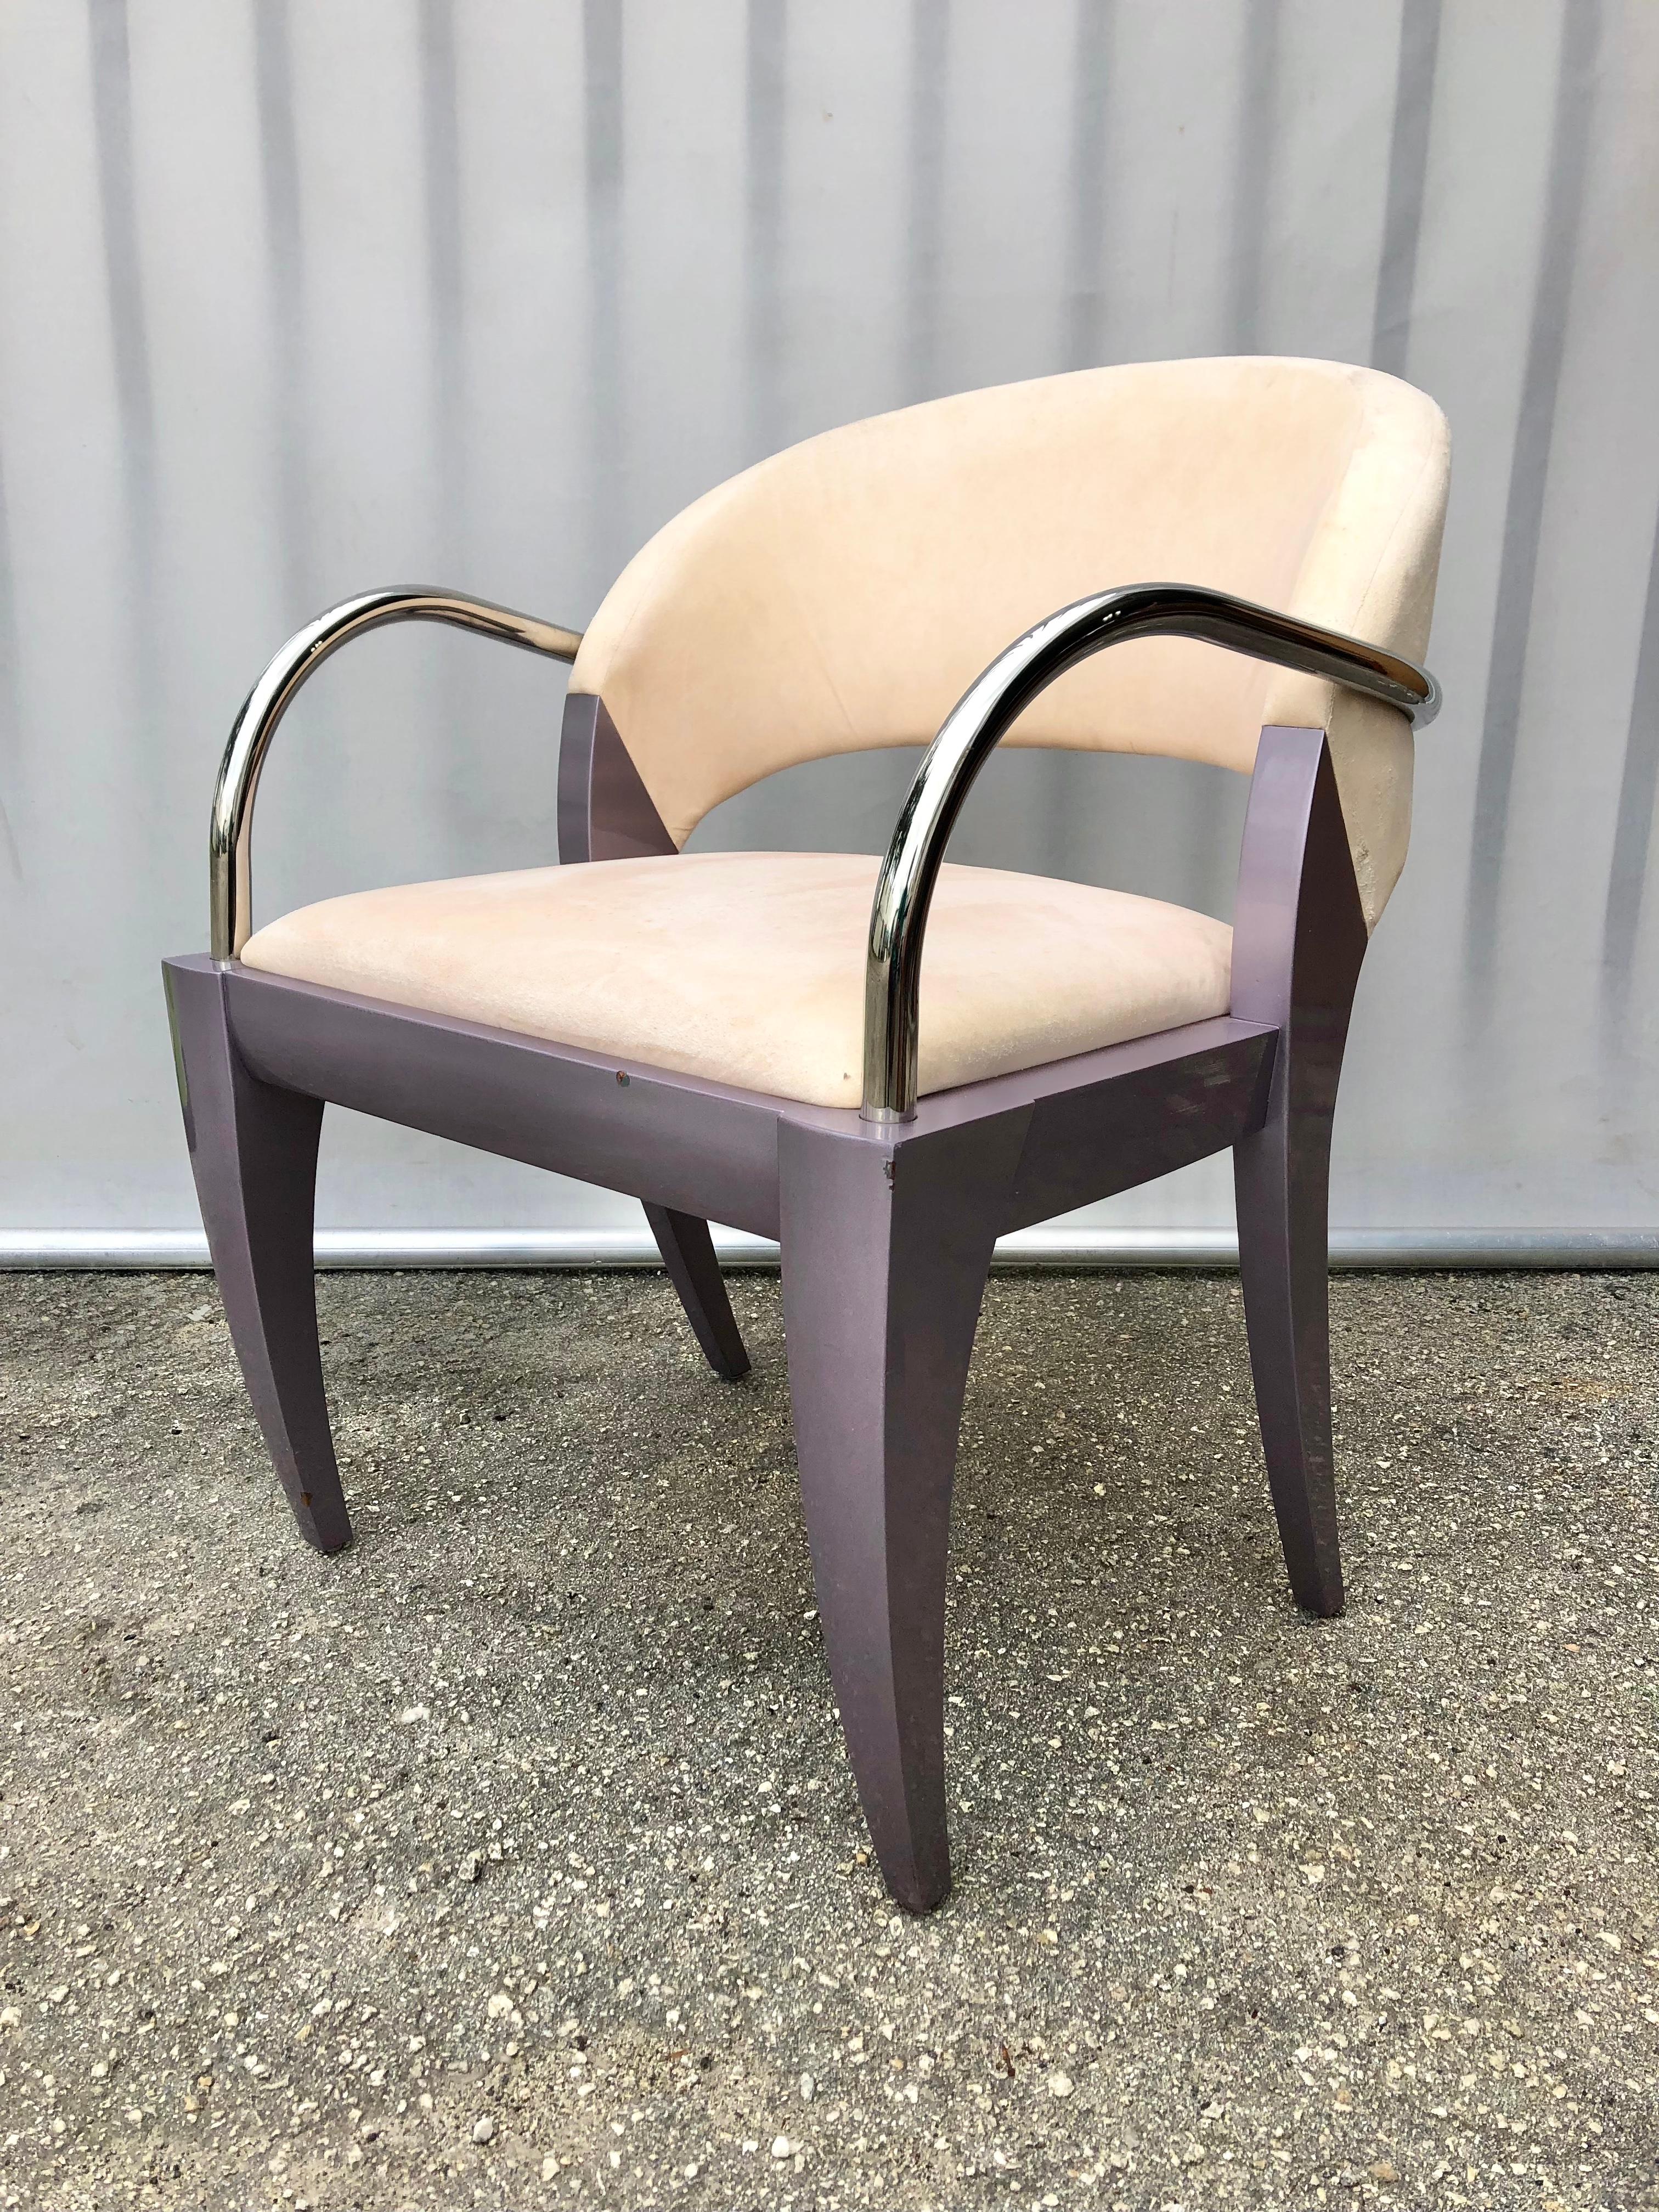 Vintage Postmodern Iconic Willow chair designed by Mitchell Pickard for Brueton Industries, NY. Circa 1980s. 
Features a gracefully curved solid wood legs with a light purple glossy lacquer finish, with tubular polished stainless steel arm rests,